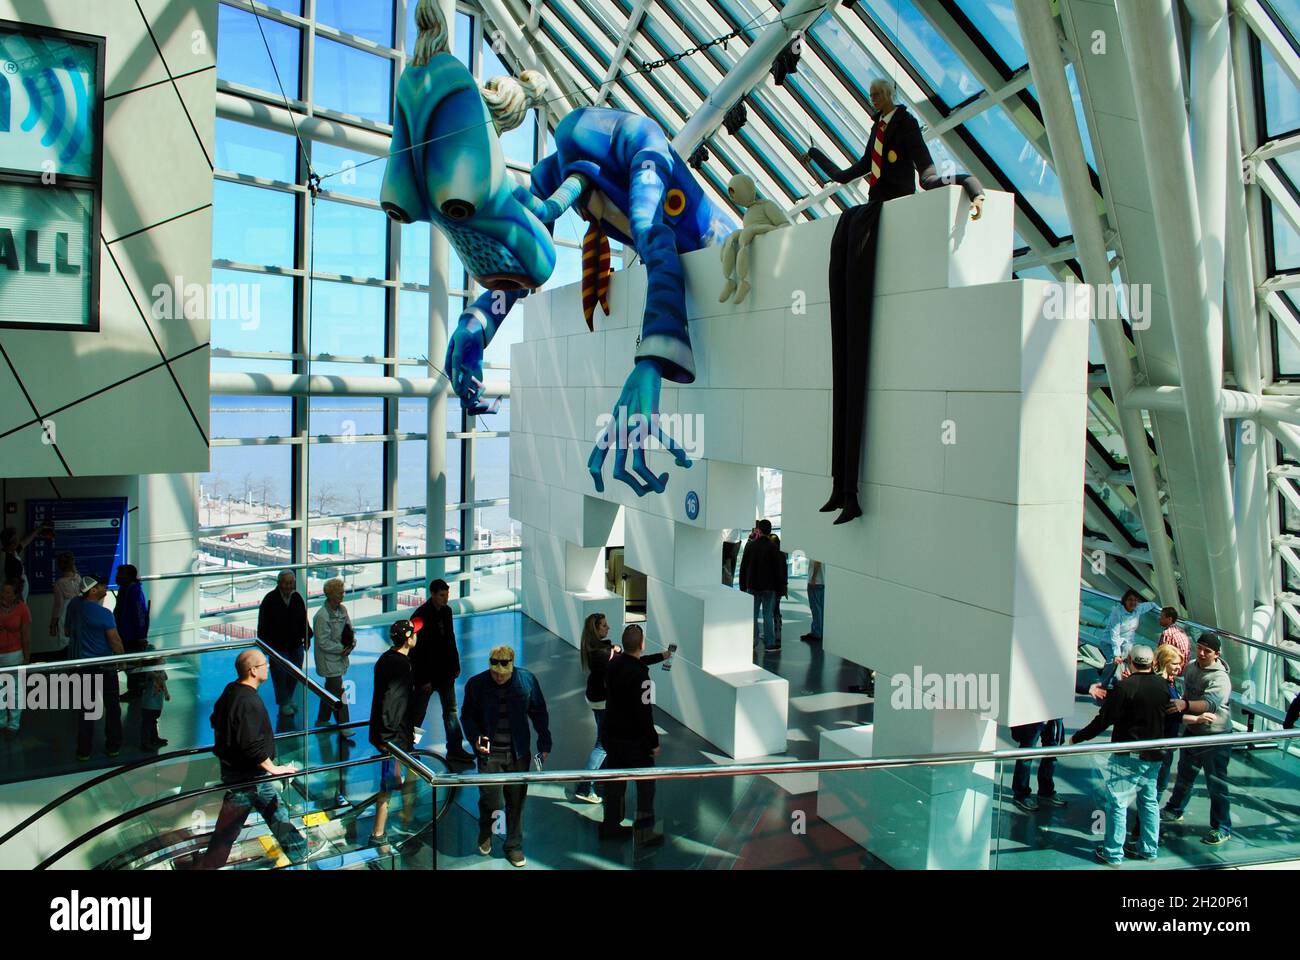 Rock and Roll Hall of Fame in Cleveland Stockfoto